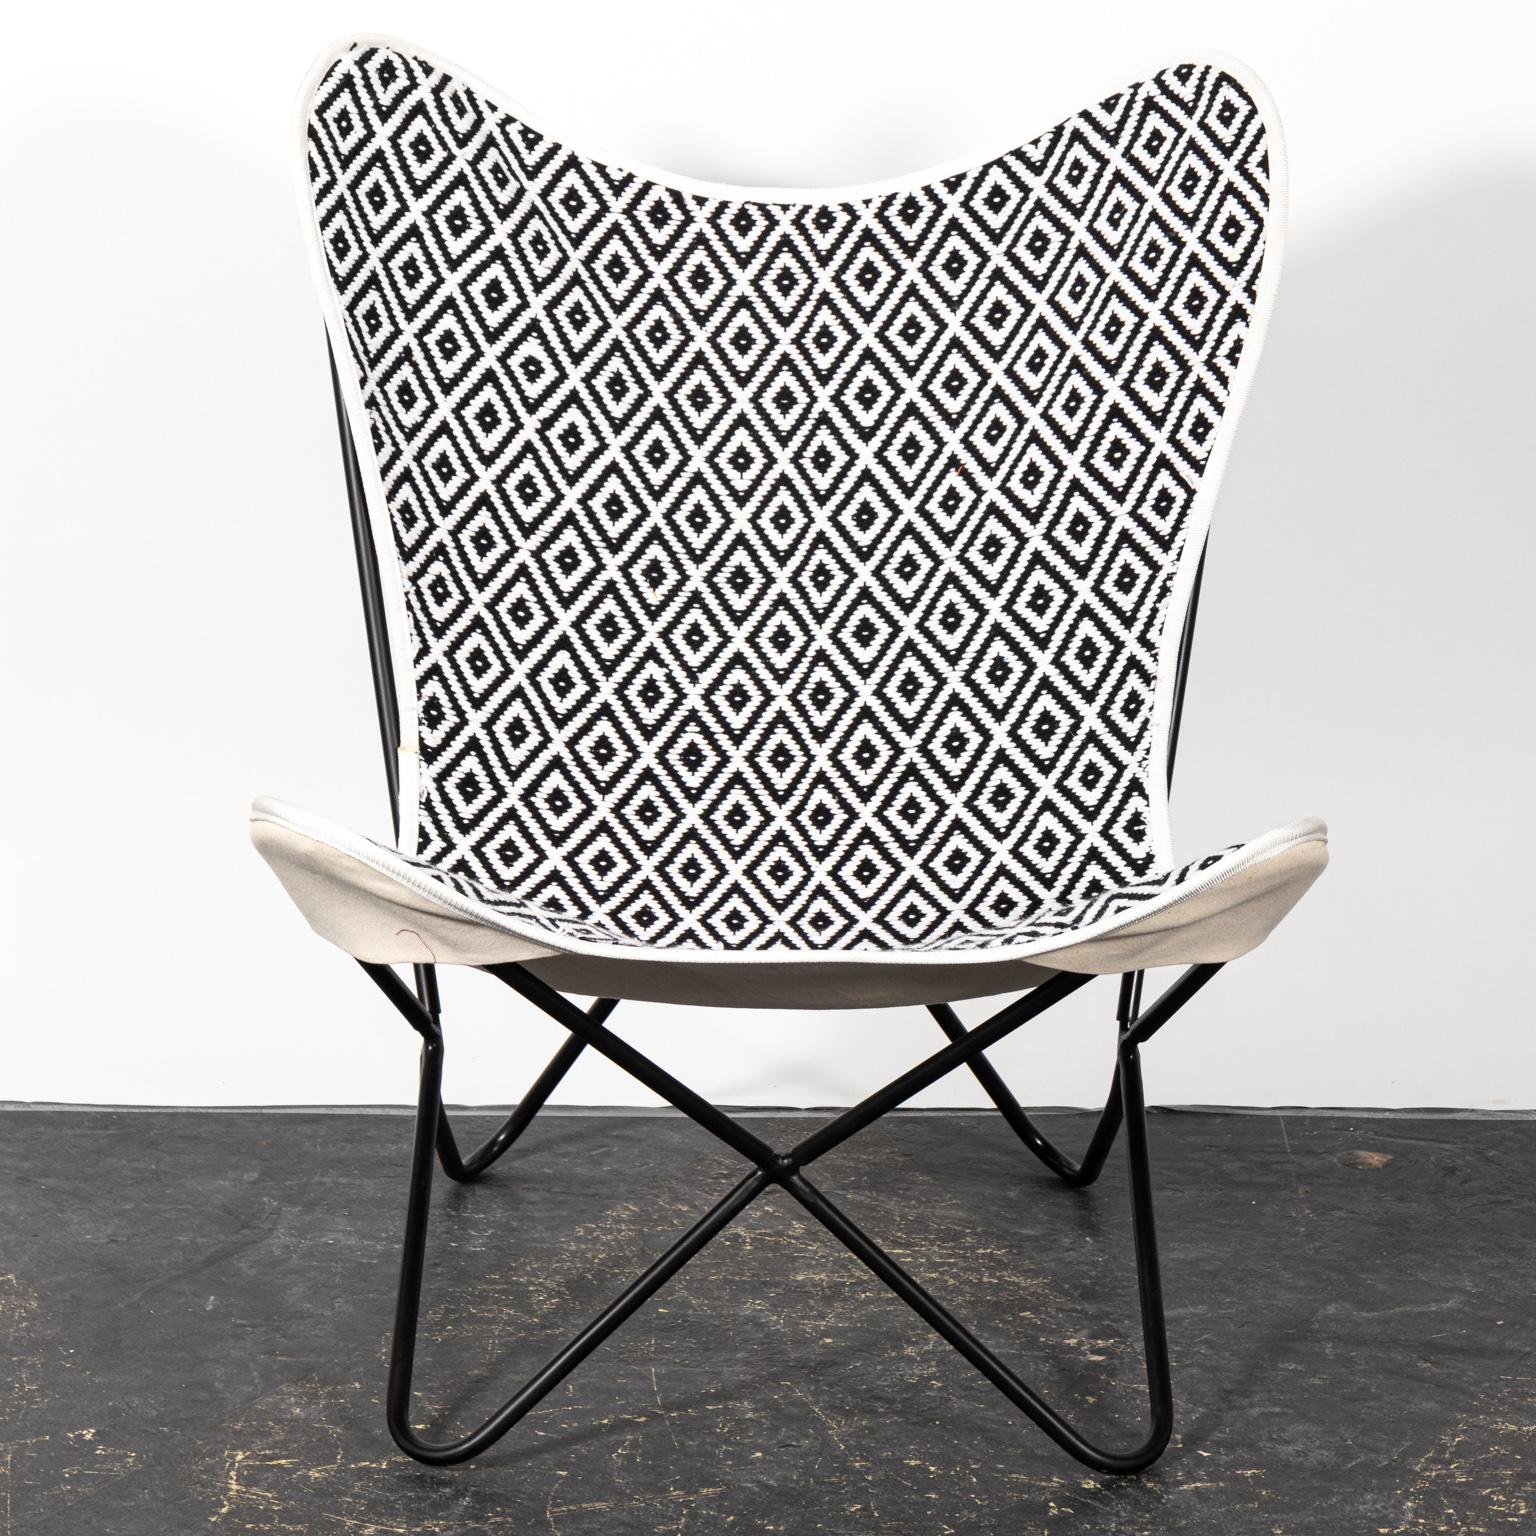 Black and white butterfly chair with diamond patterned upholstery. Please note of wear consistent with age.